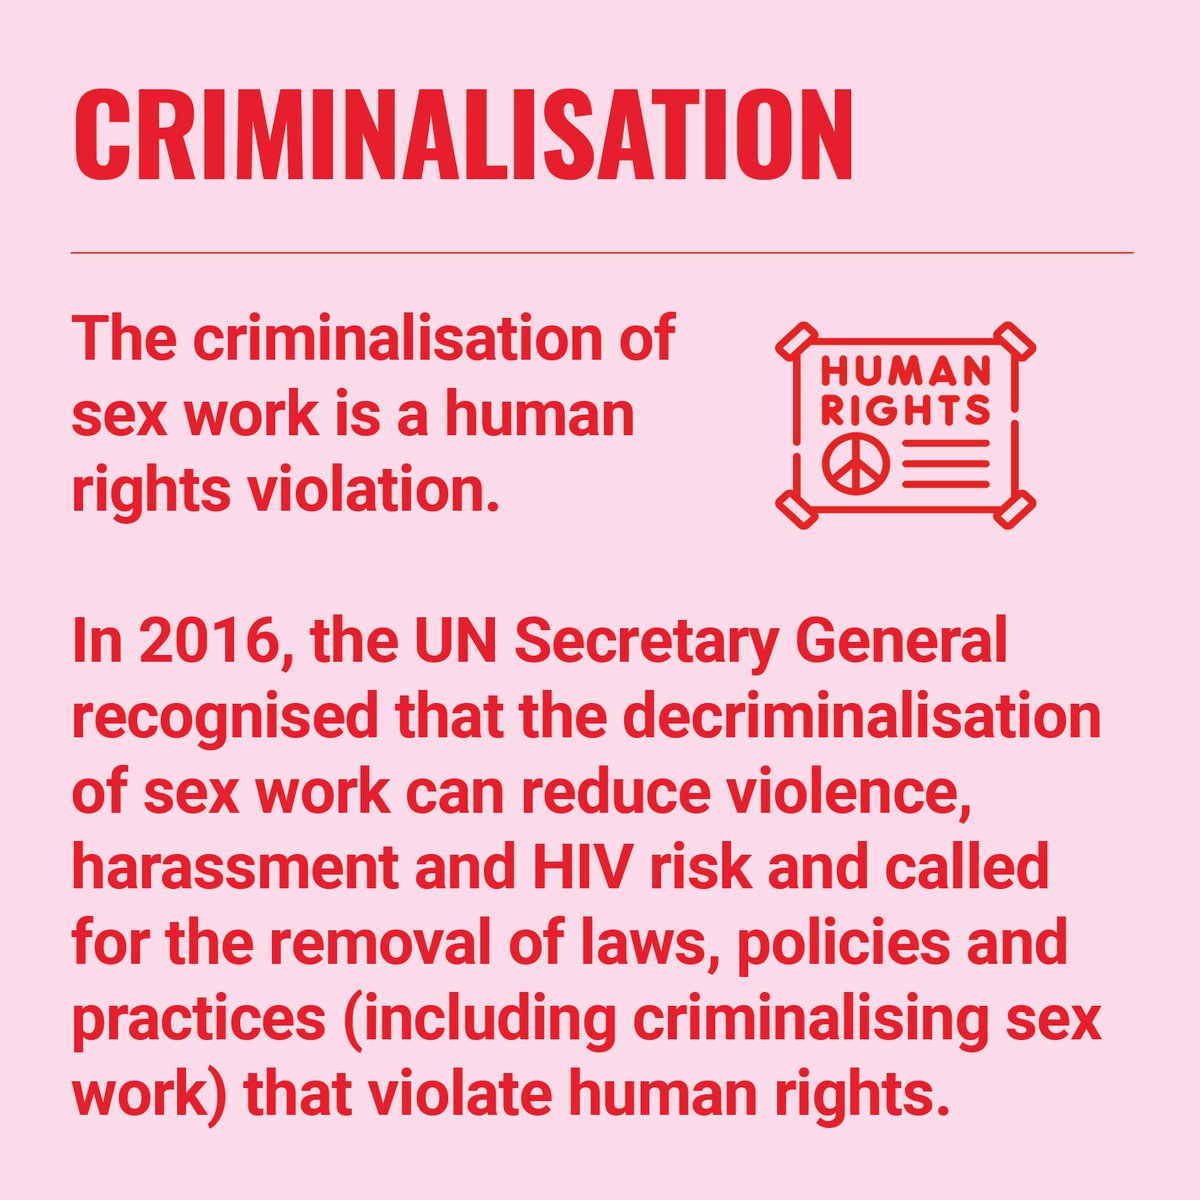 The UN's Guide to the Human Rights of Sex Workers has confirmed that decriminalisation is best practice to uphold the human rights of sex workers: 'Sex work is real work. Everyone deserves dignity, autonomy and safety in the workplace, including sex workers.'